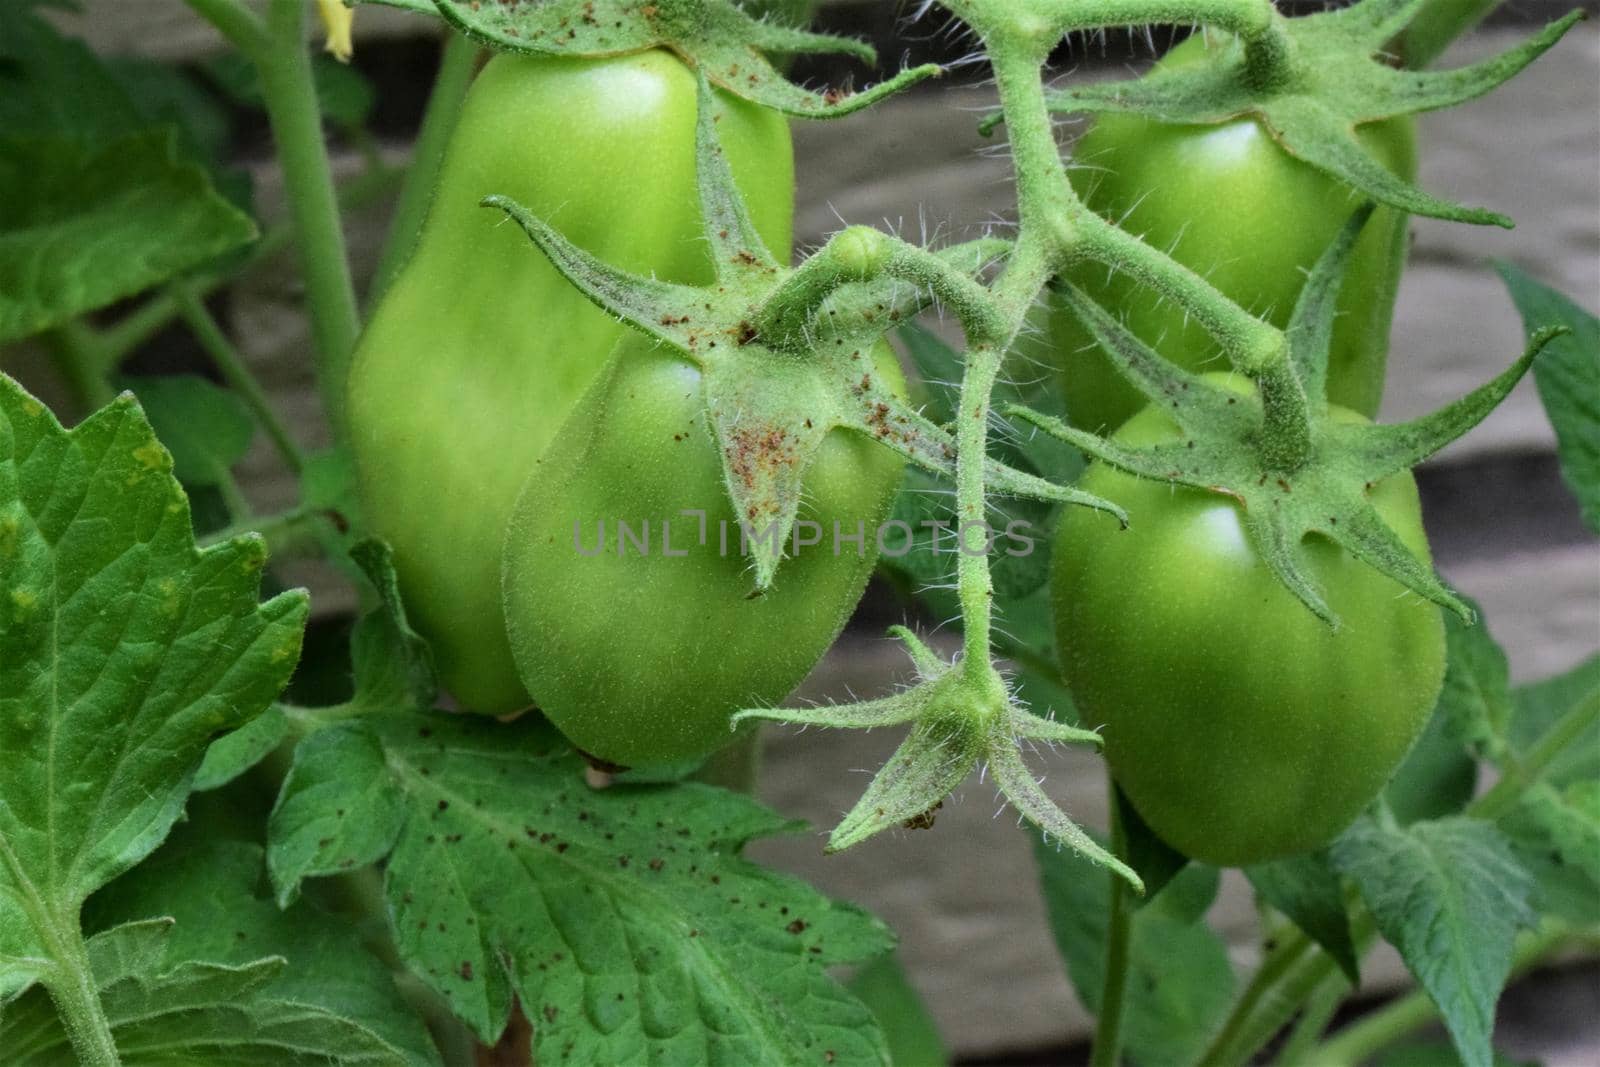 Unripe green tomatoes on the stem as a close up by Luise123